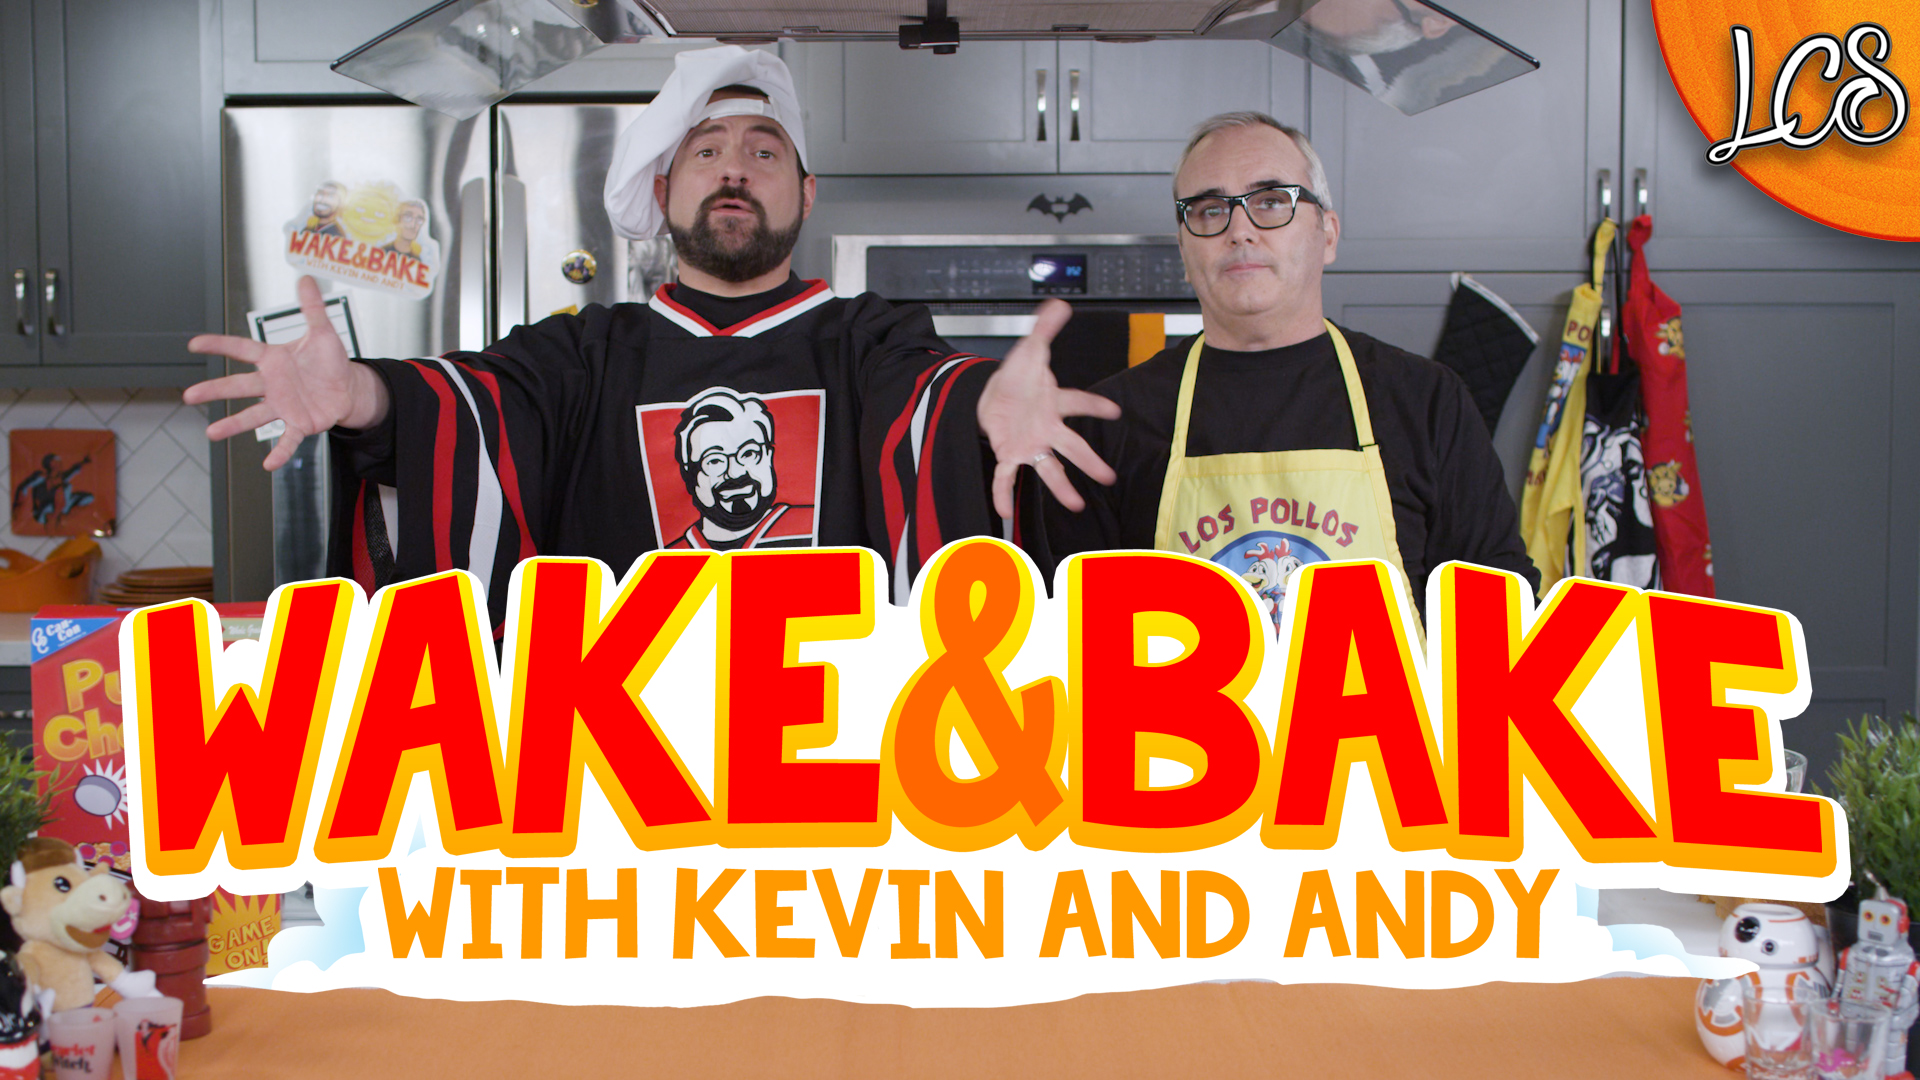 The Daily Crate | Announcing: Wake and Bake with Kevin Smith and Andy McElfresh!